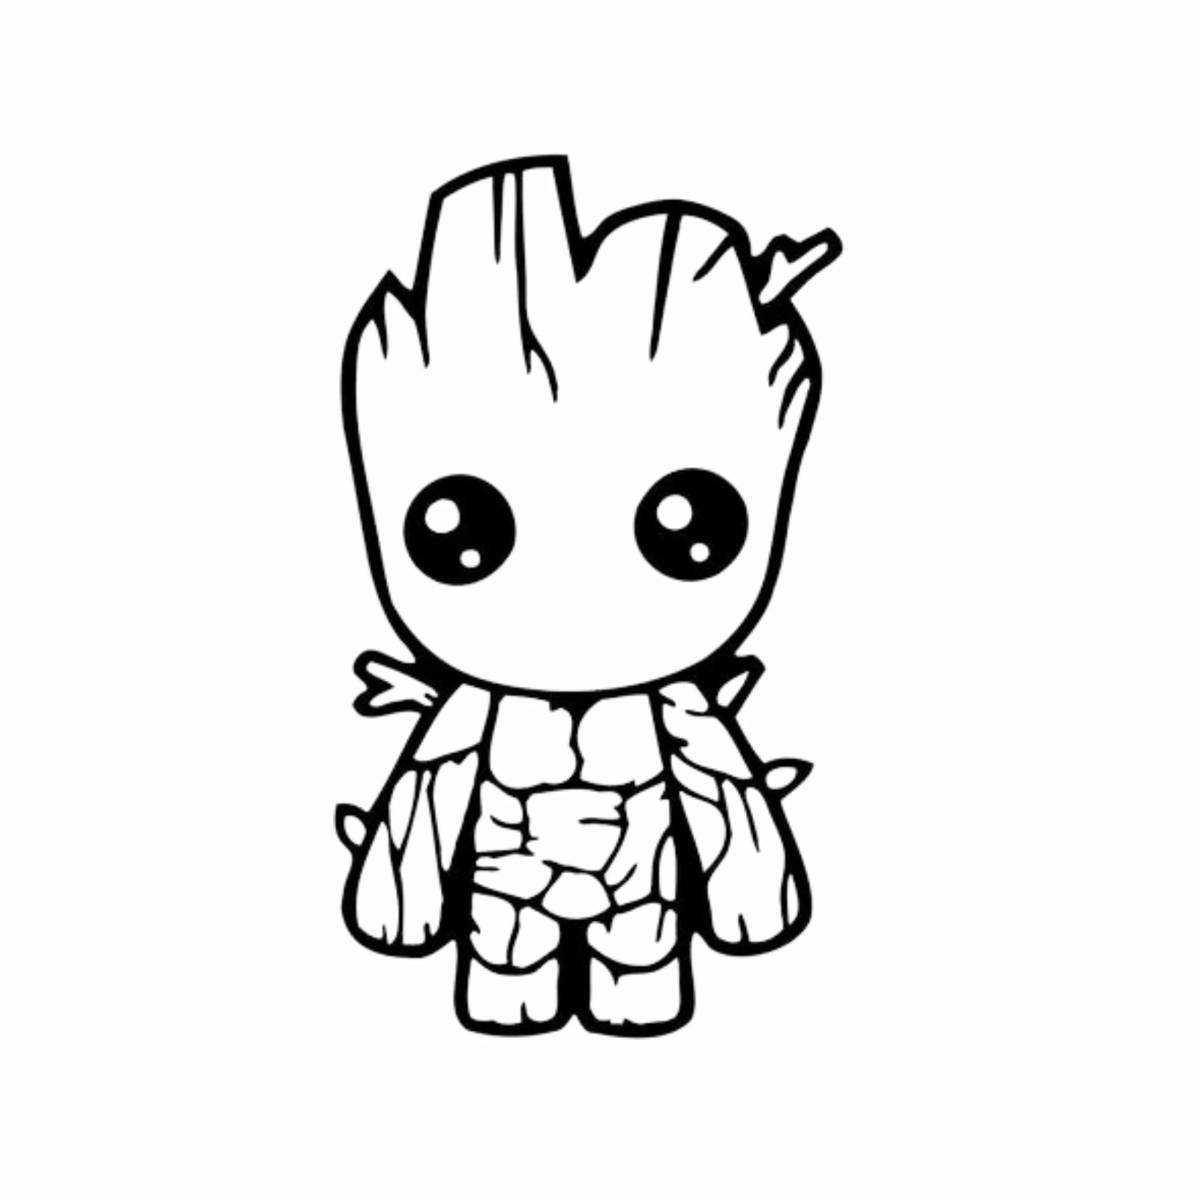 Adorable groot coloring from marvel